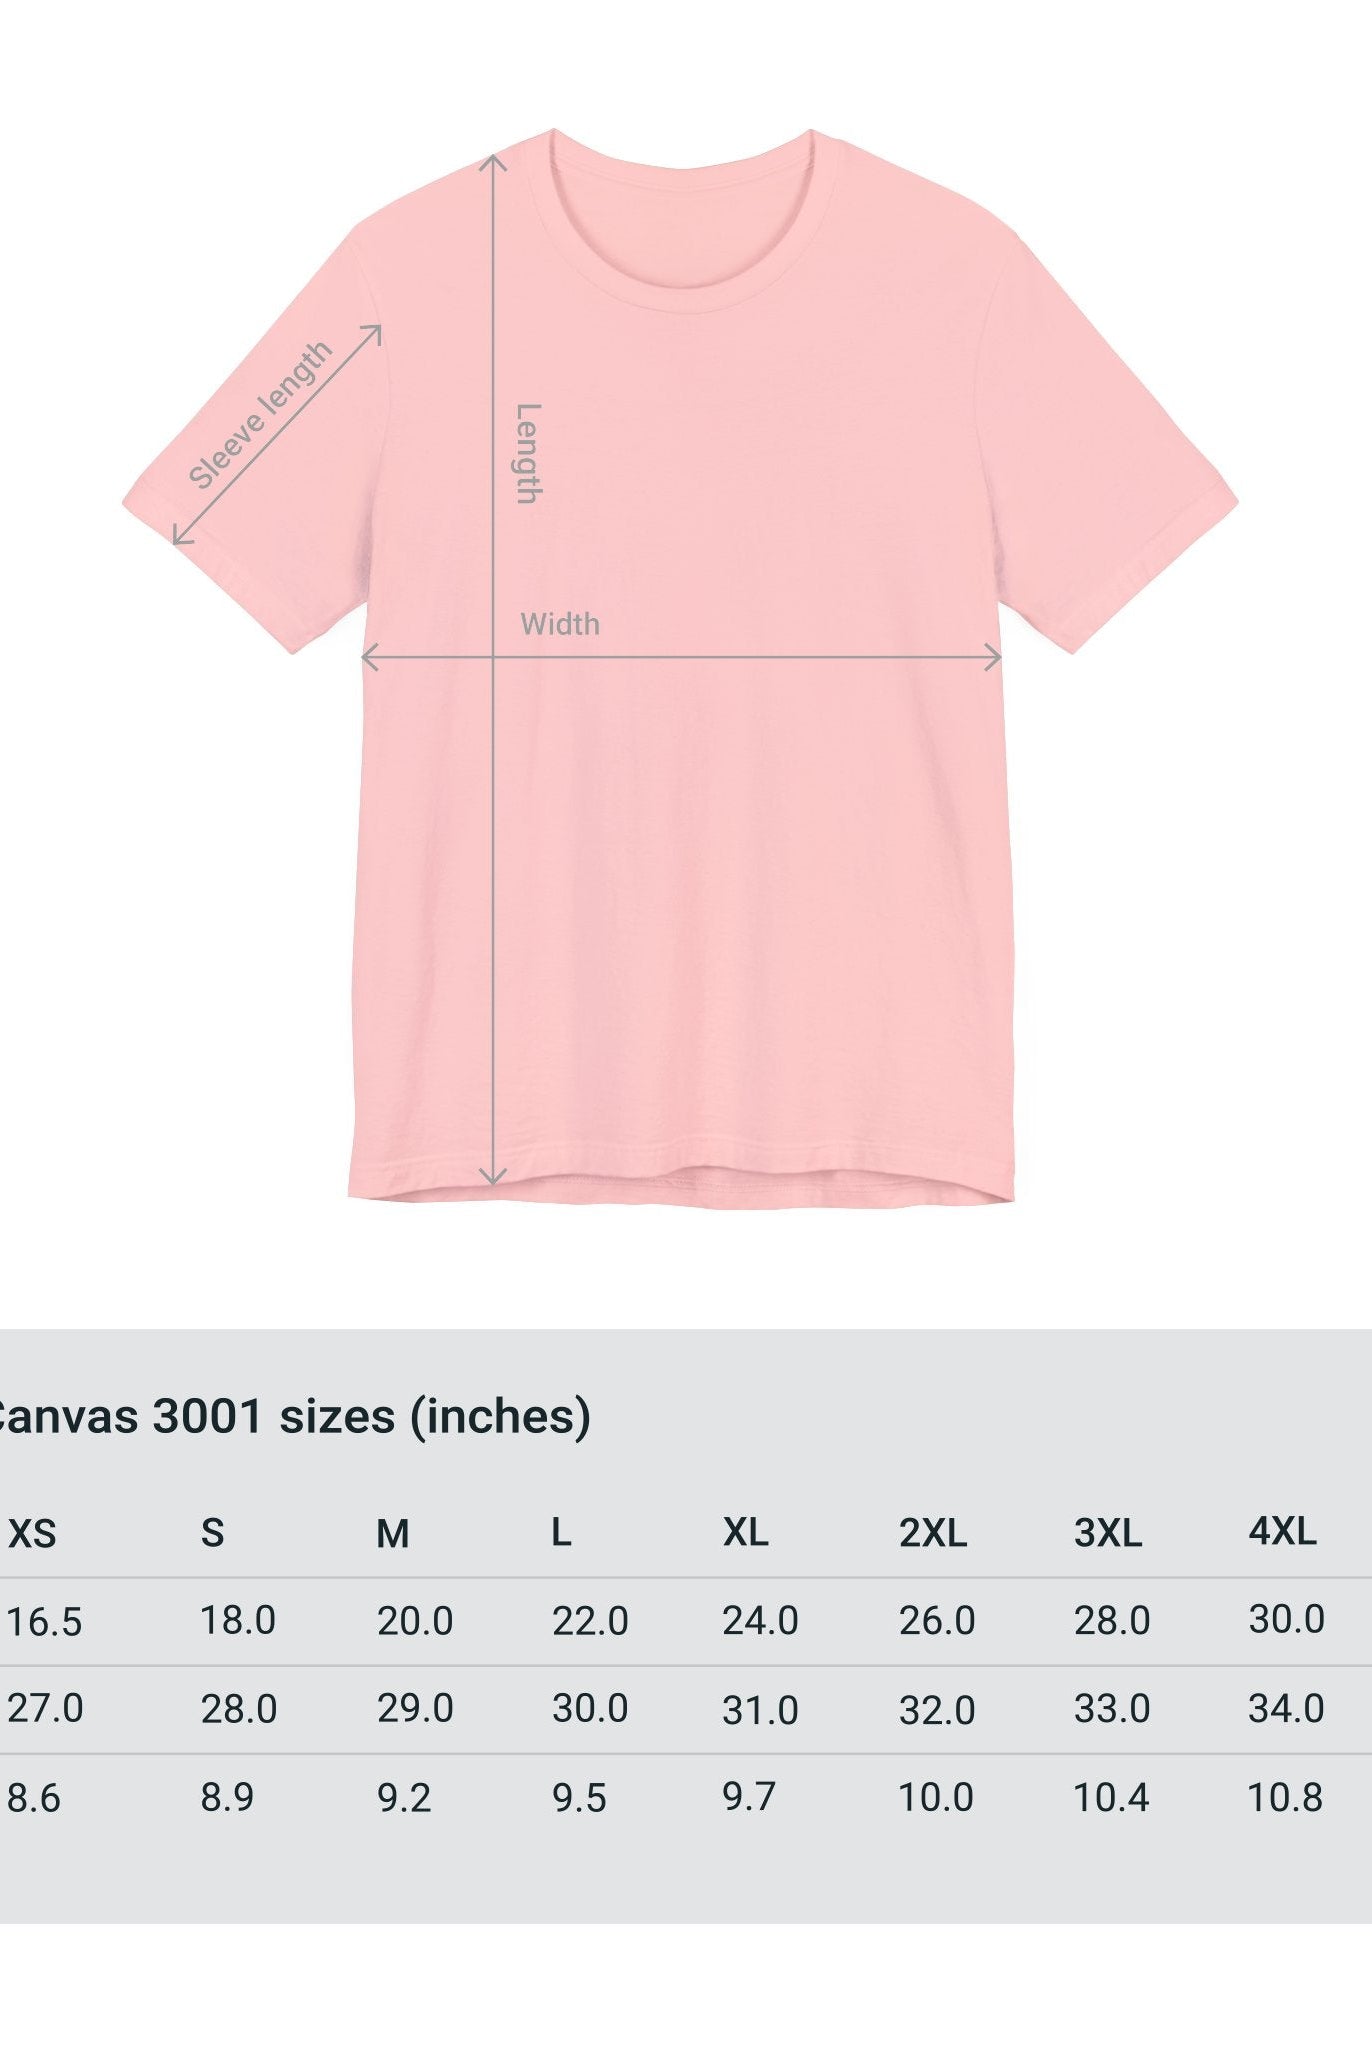 Adventure Unlimited Surfing T-Shirt with Size Measurements - Printed Direct-to-Garment - Soulshinecreators - Bella & Canvas - EU